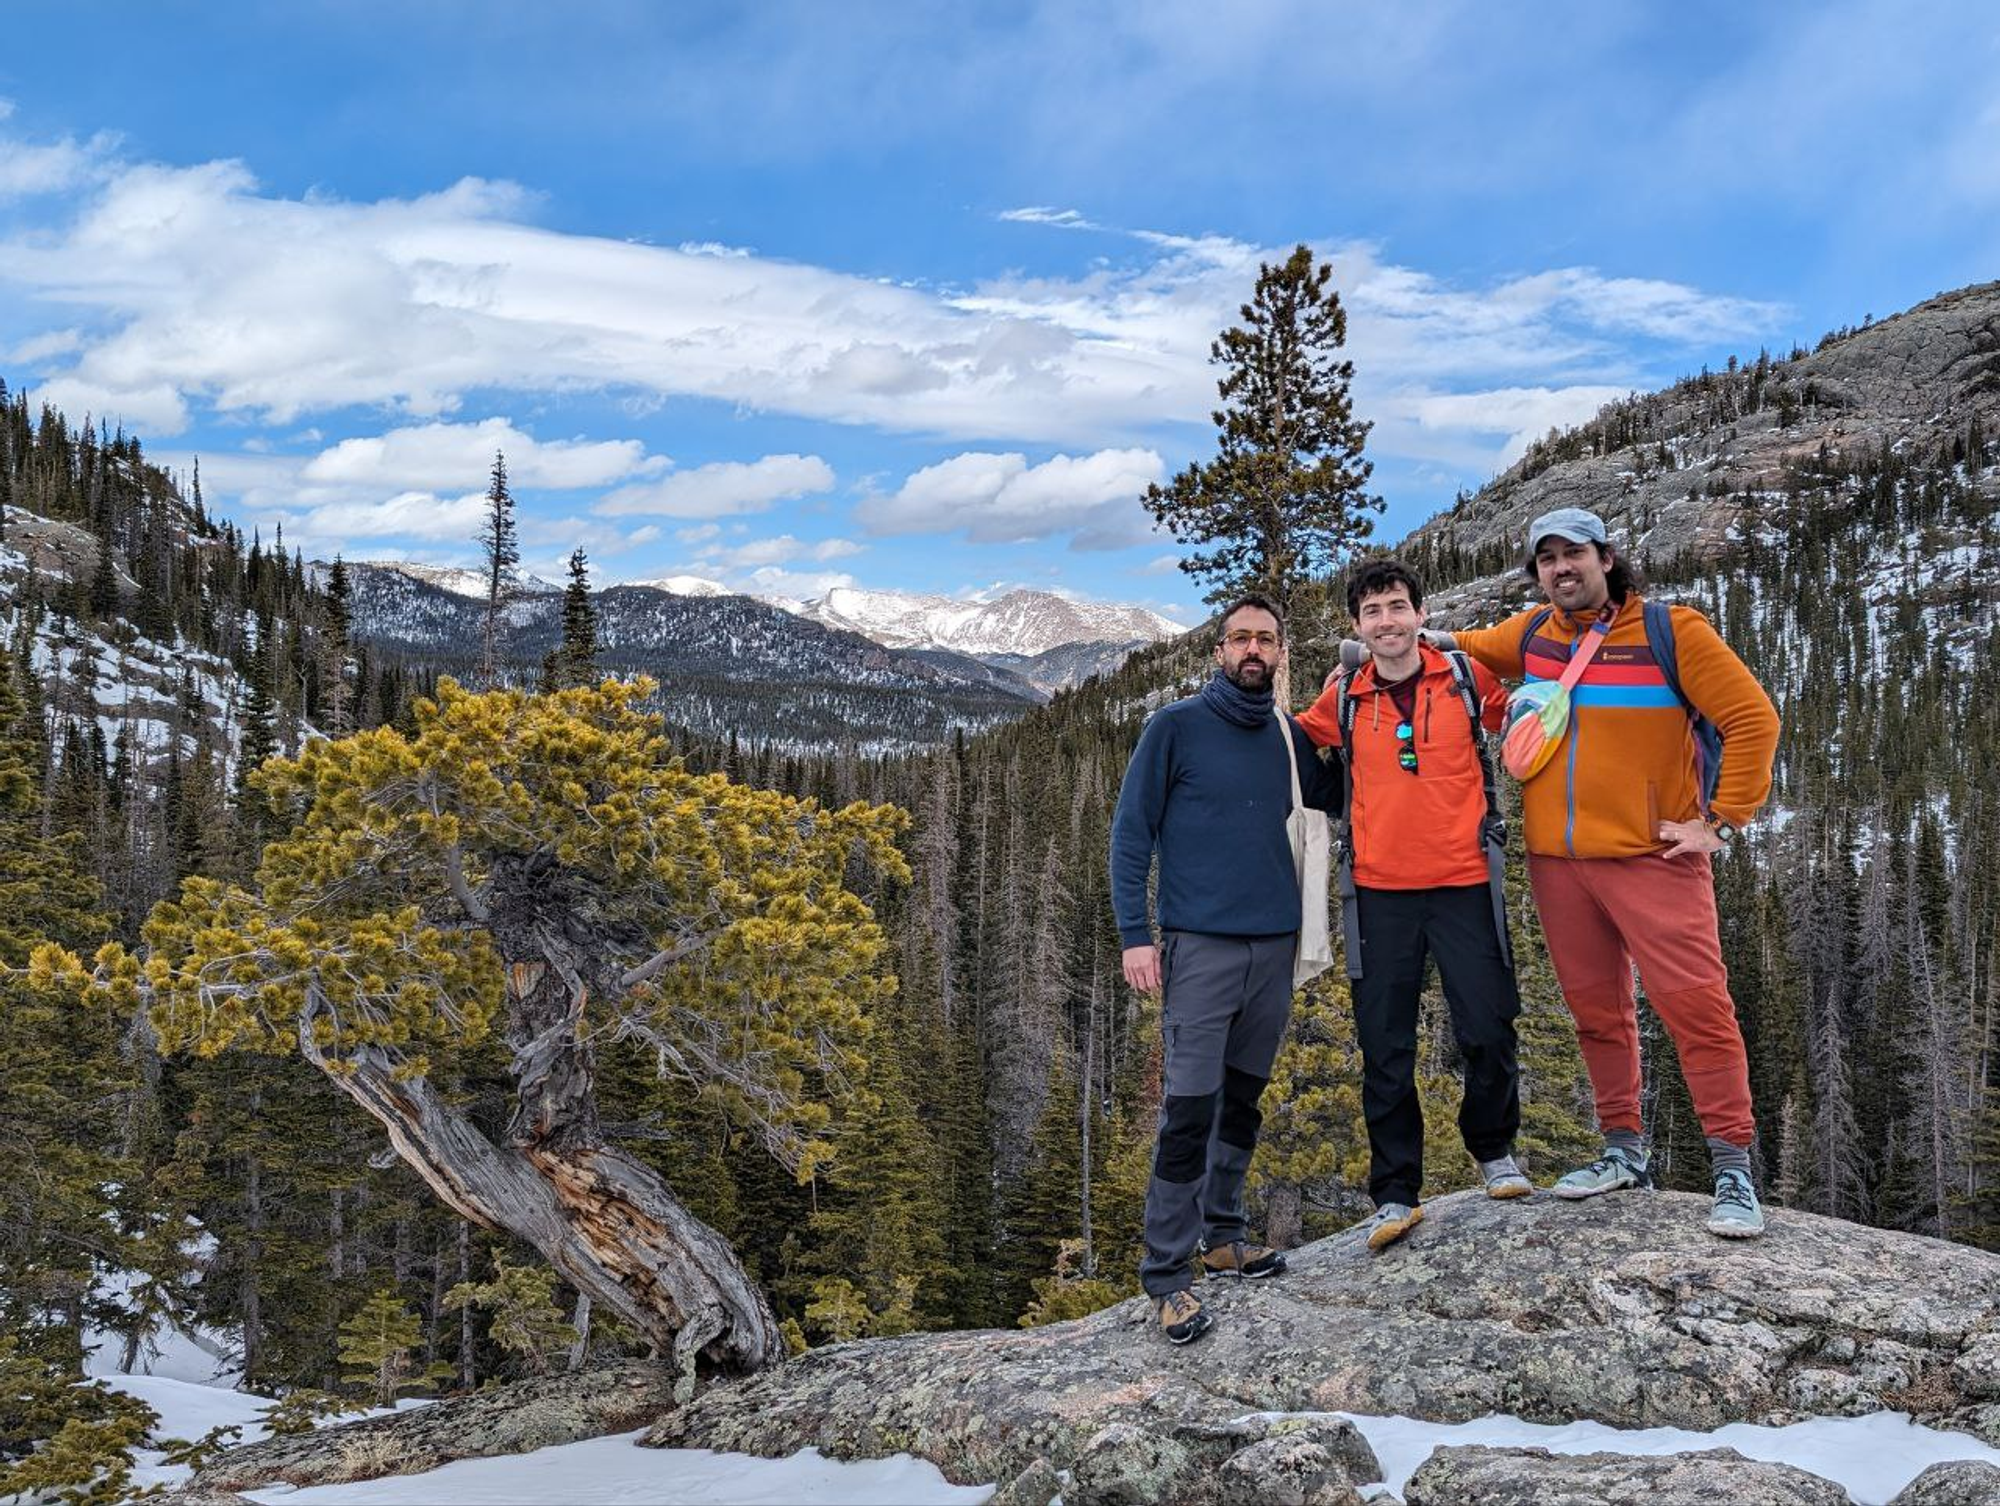 The SenseMakers crew, in our first real-world meetup in the beautiful Rockies. From left to right: Pepo, Ronen, Shahar